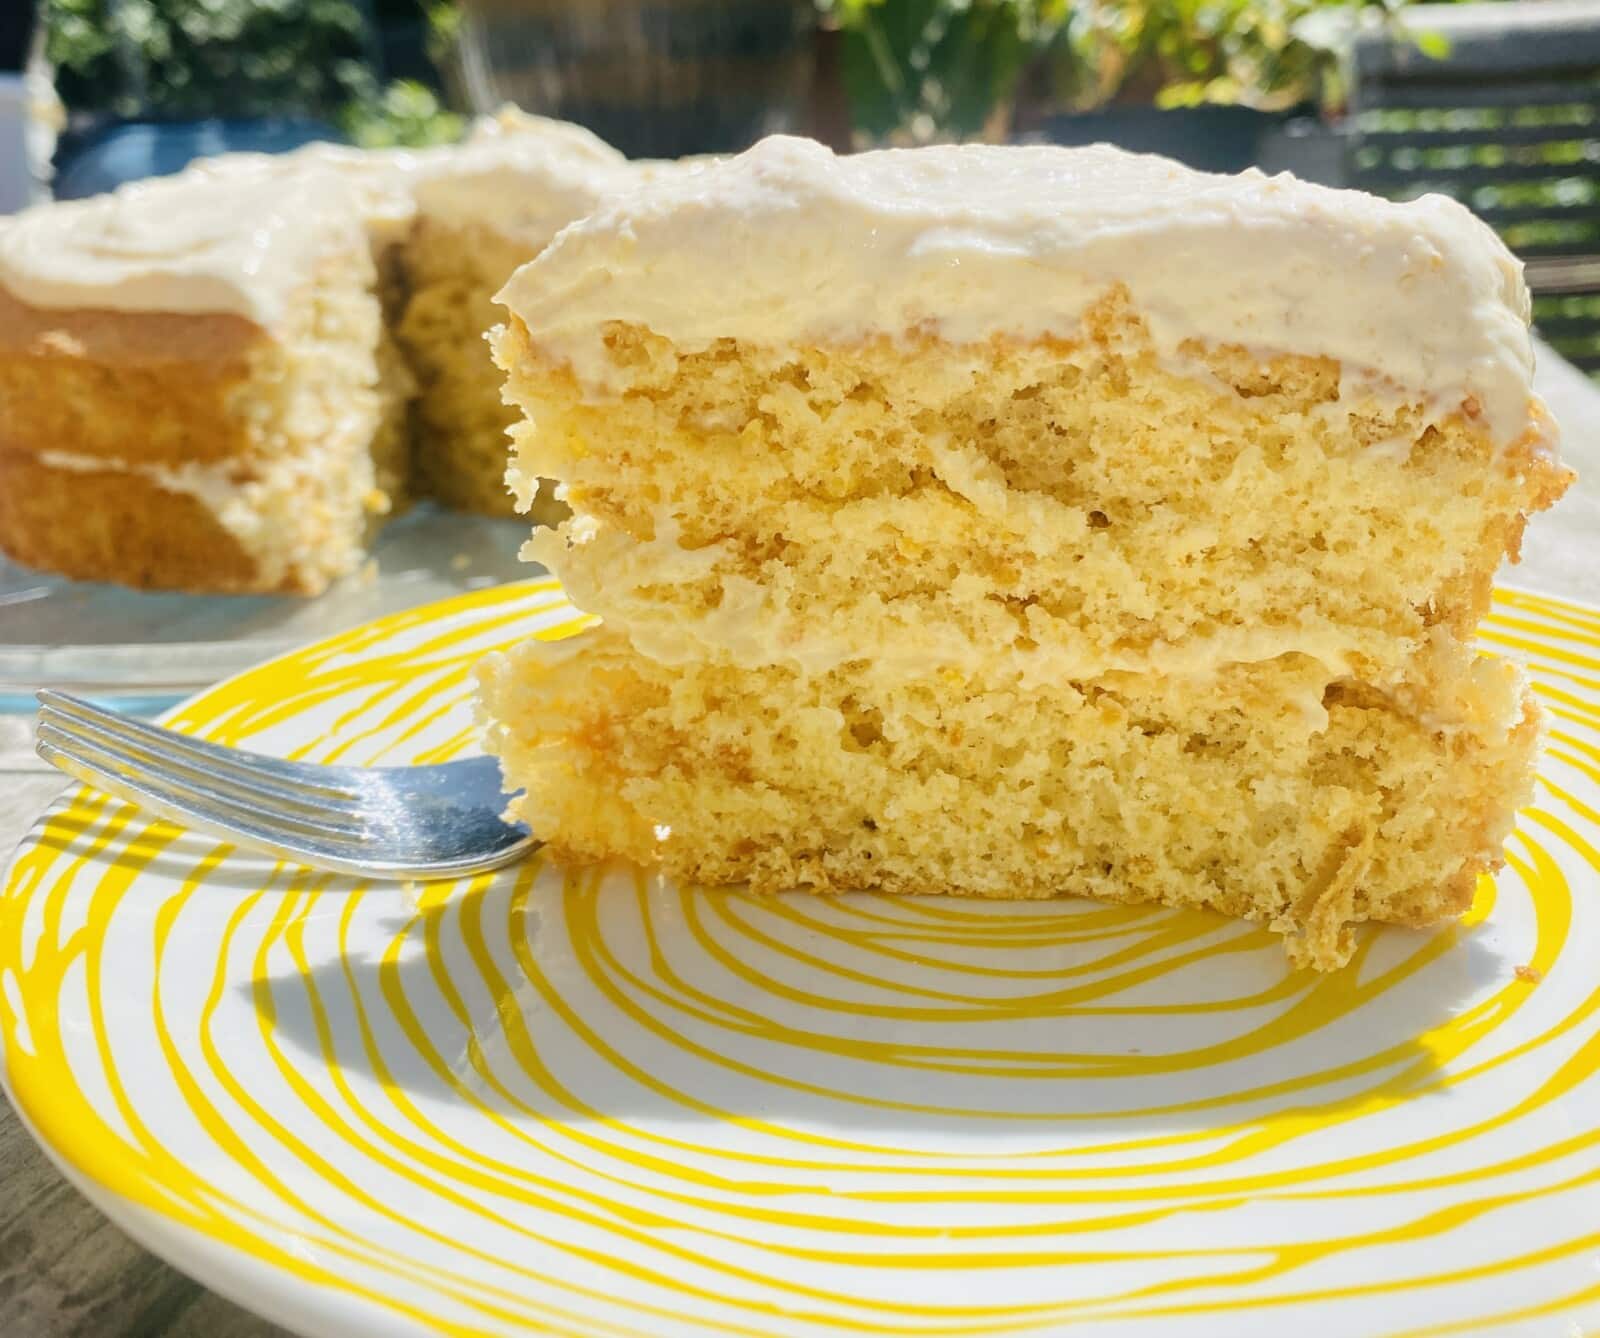 a slice of orange cake with cream cheese frosting